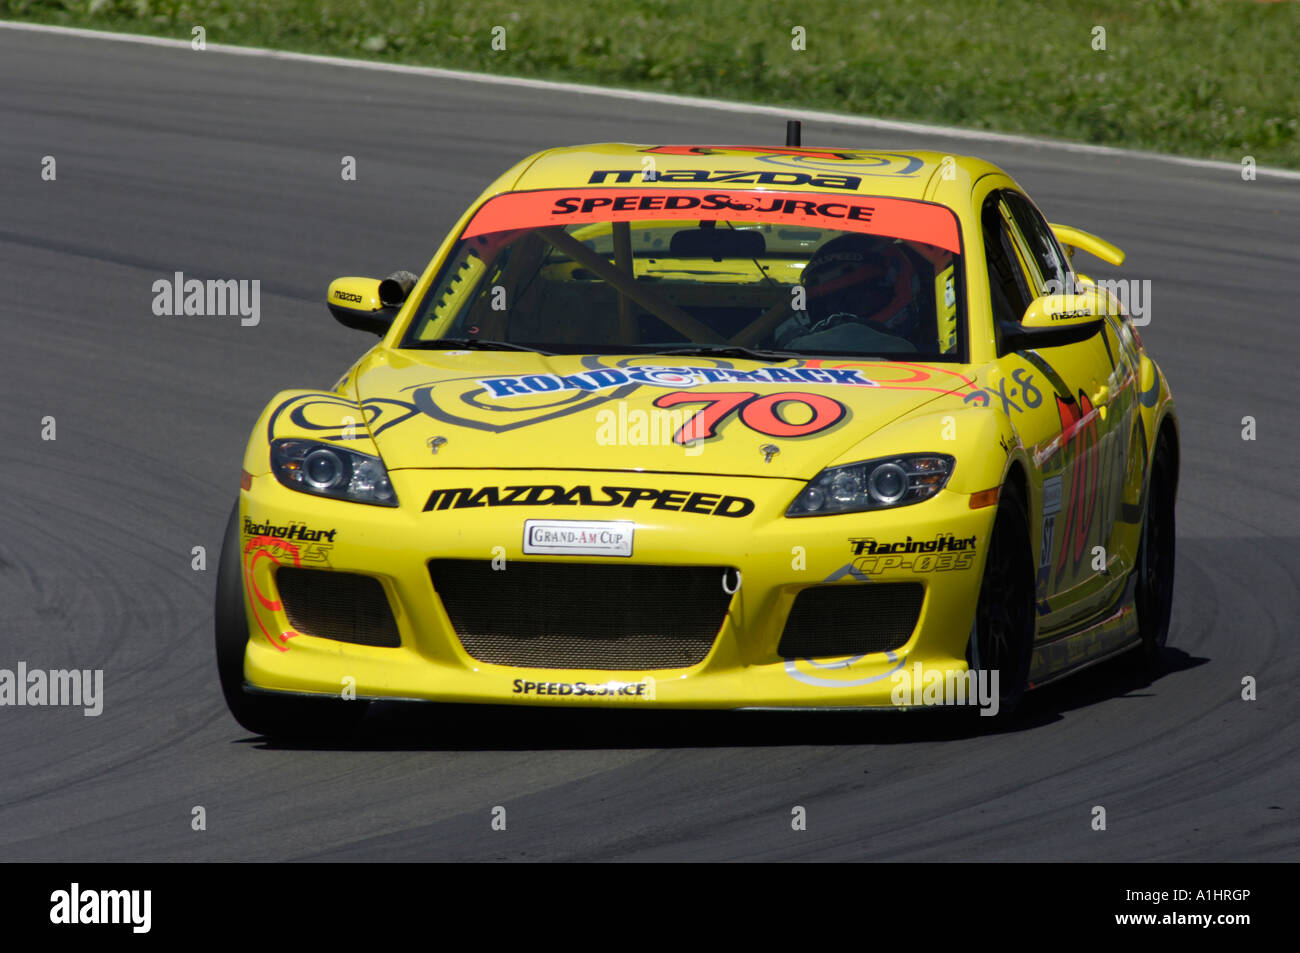 The Speedsource Mazda RX-8 raced by David Haskell and Sylvain Tremblay at the Mid-Ohio Sports Car Course 2006 Stock Photo